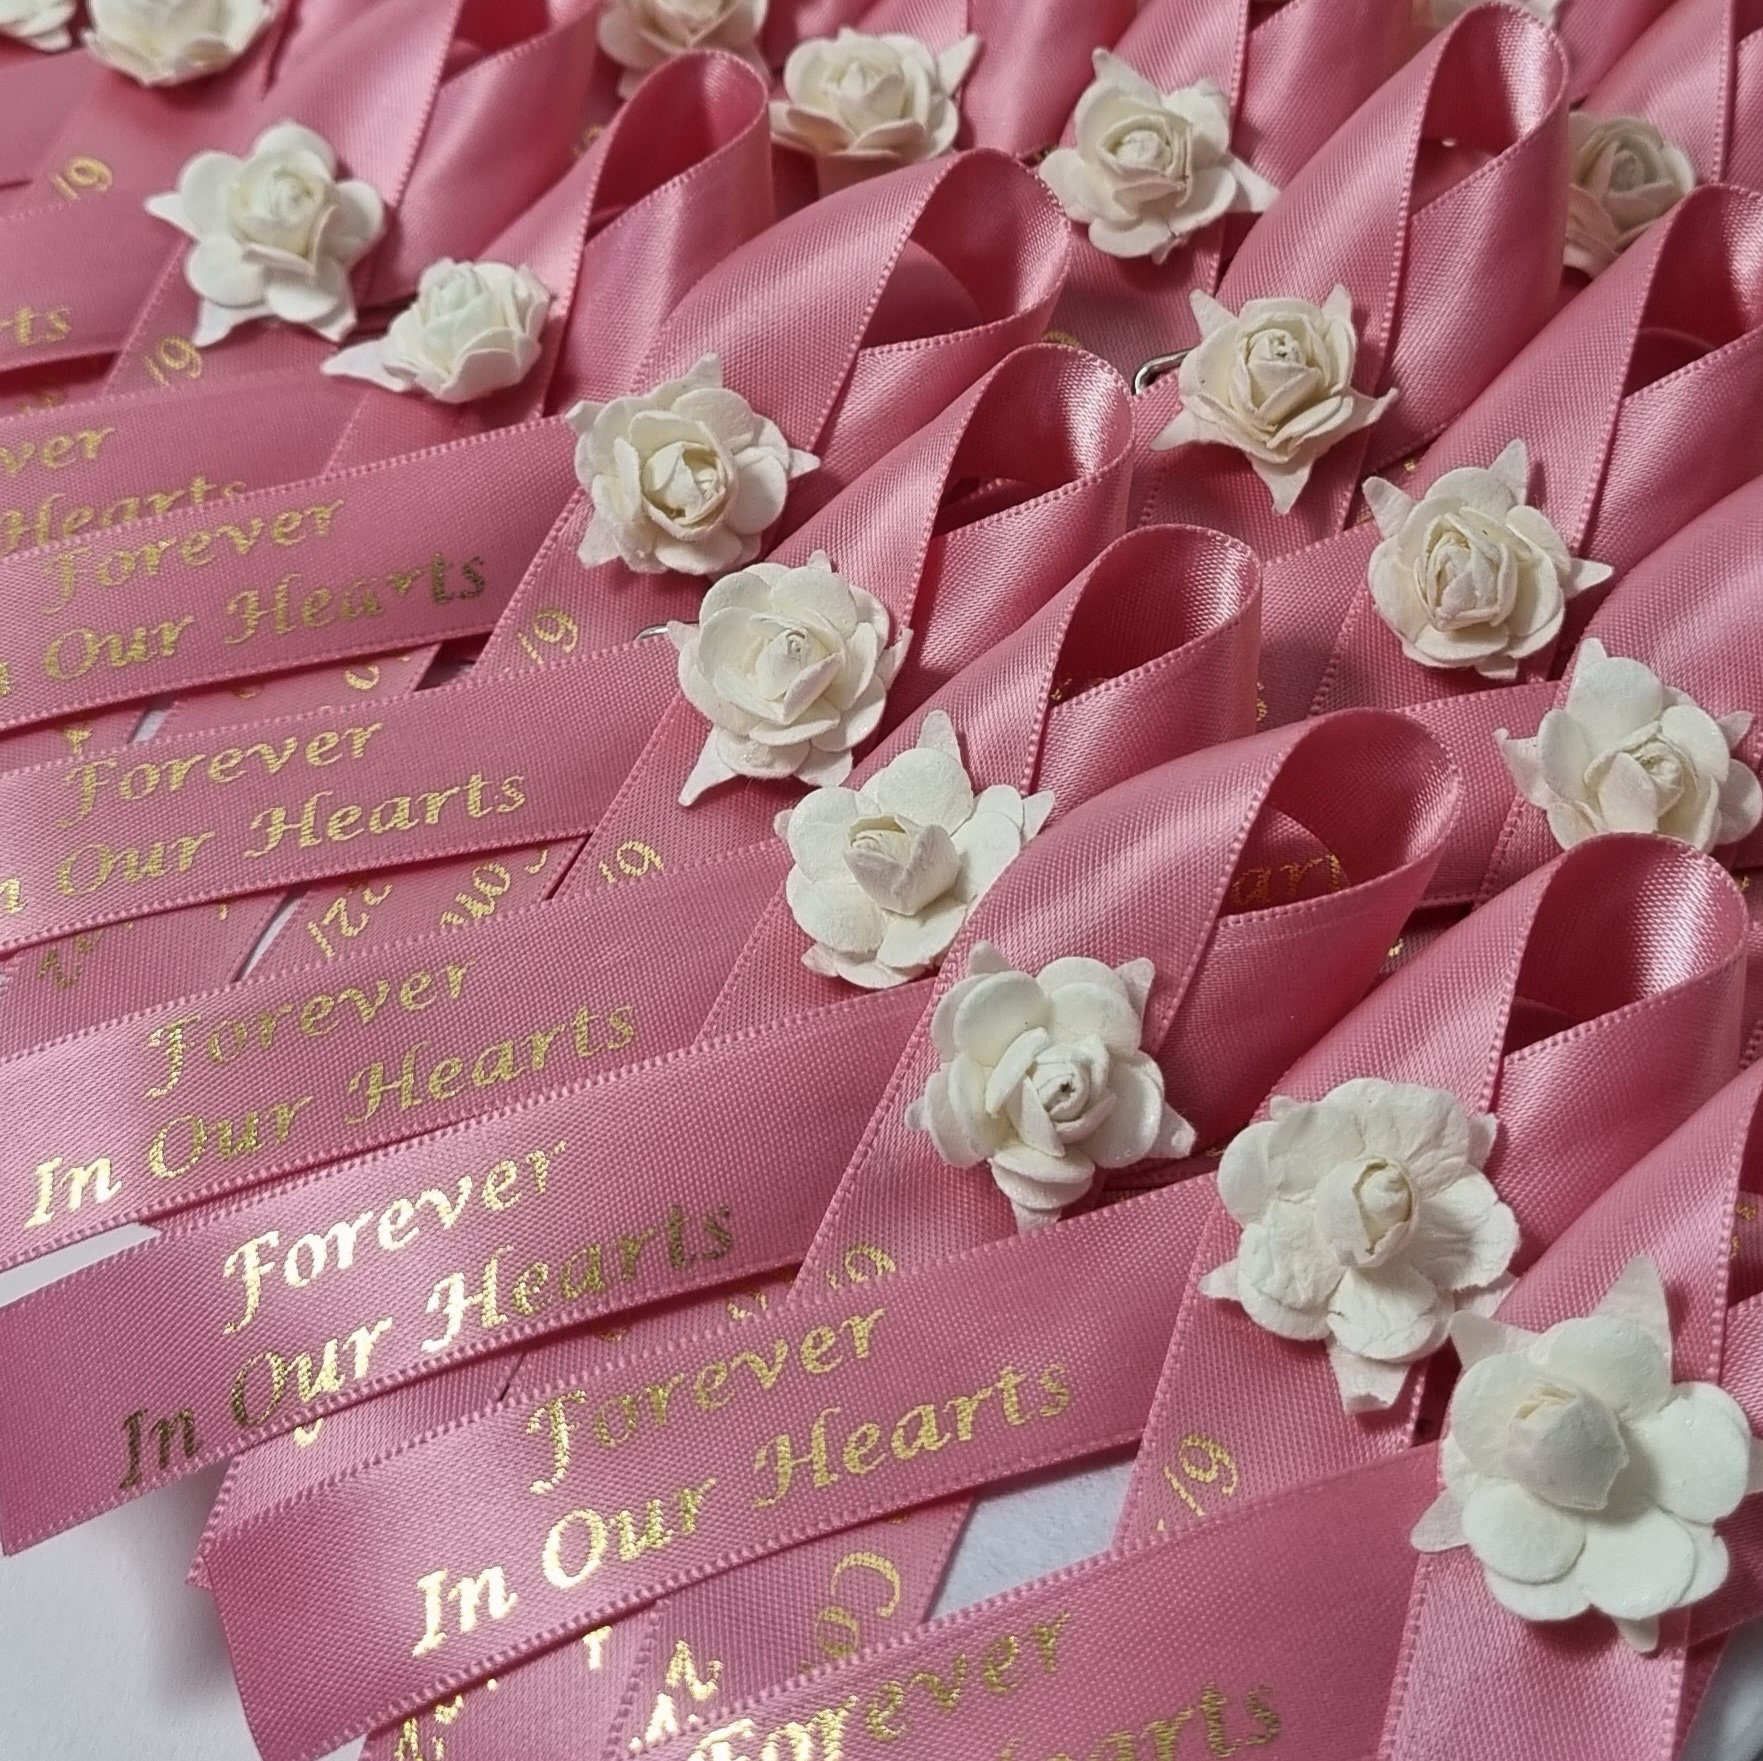 Memorial Ribbon Floral Bouquet – Keepsake Re-Creations Handcrafted